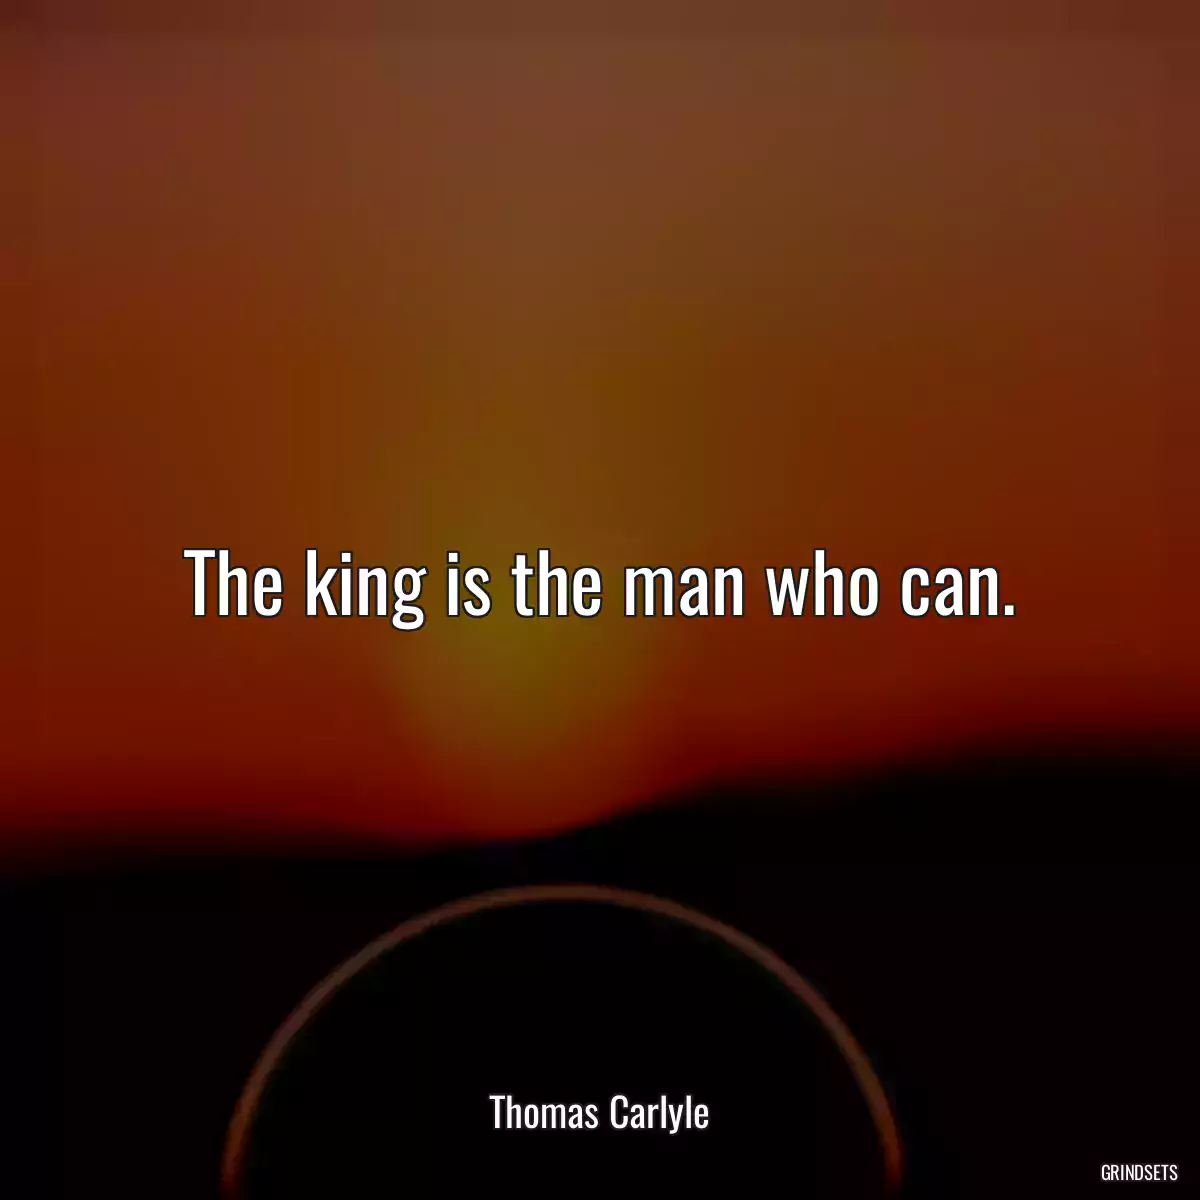 The king is the man who can.